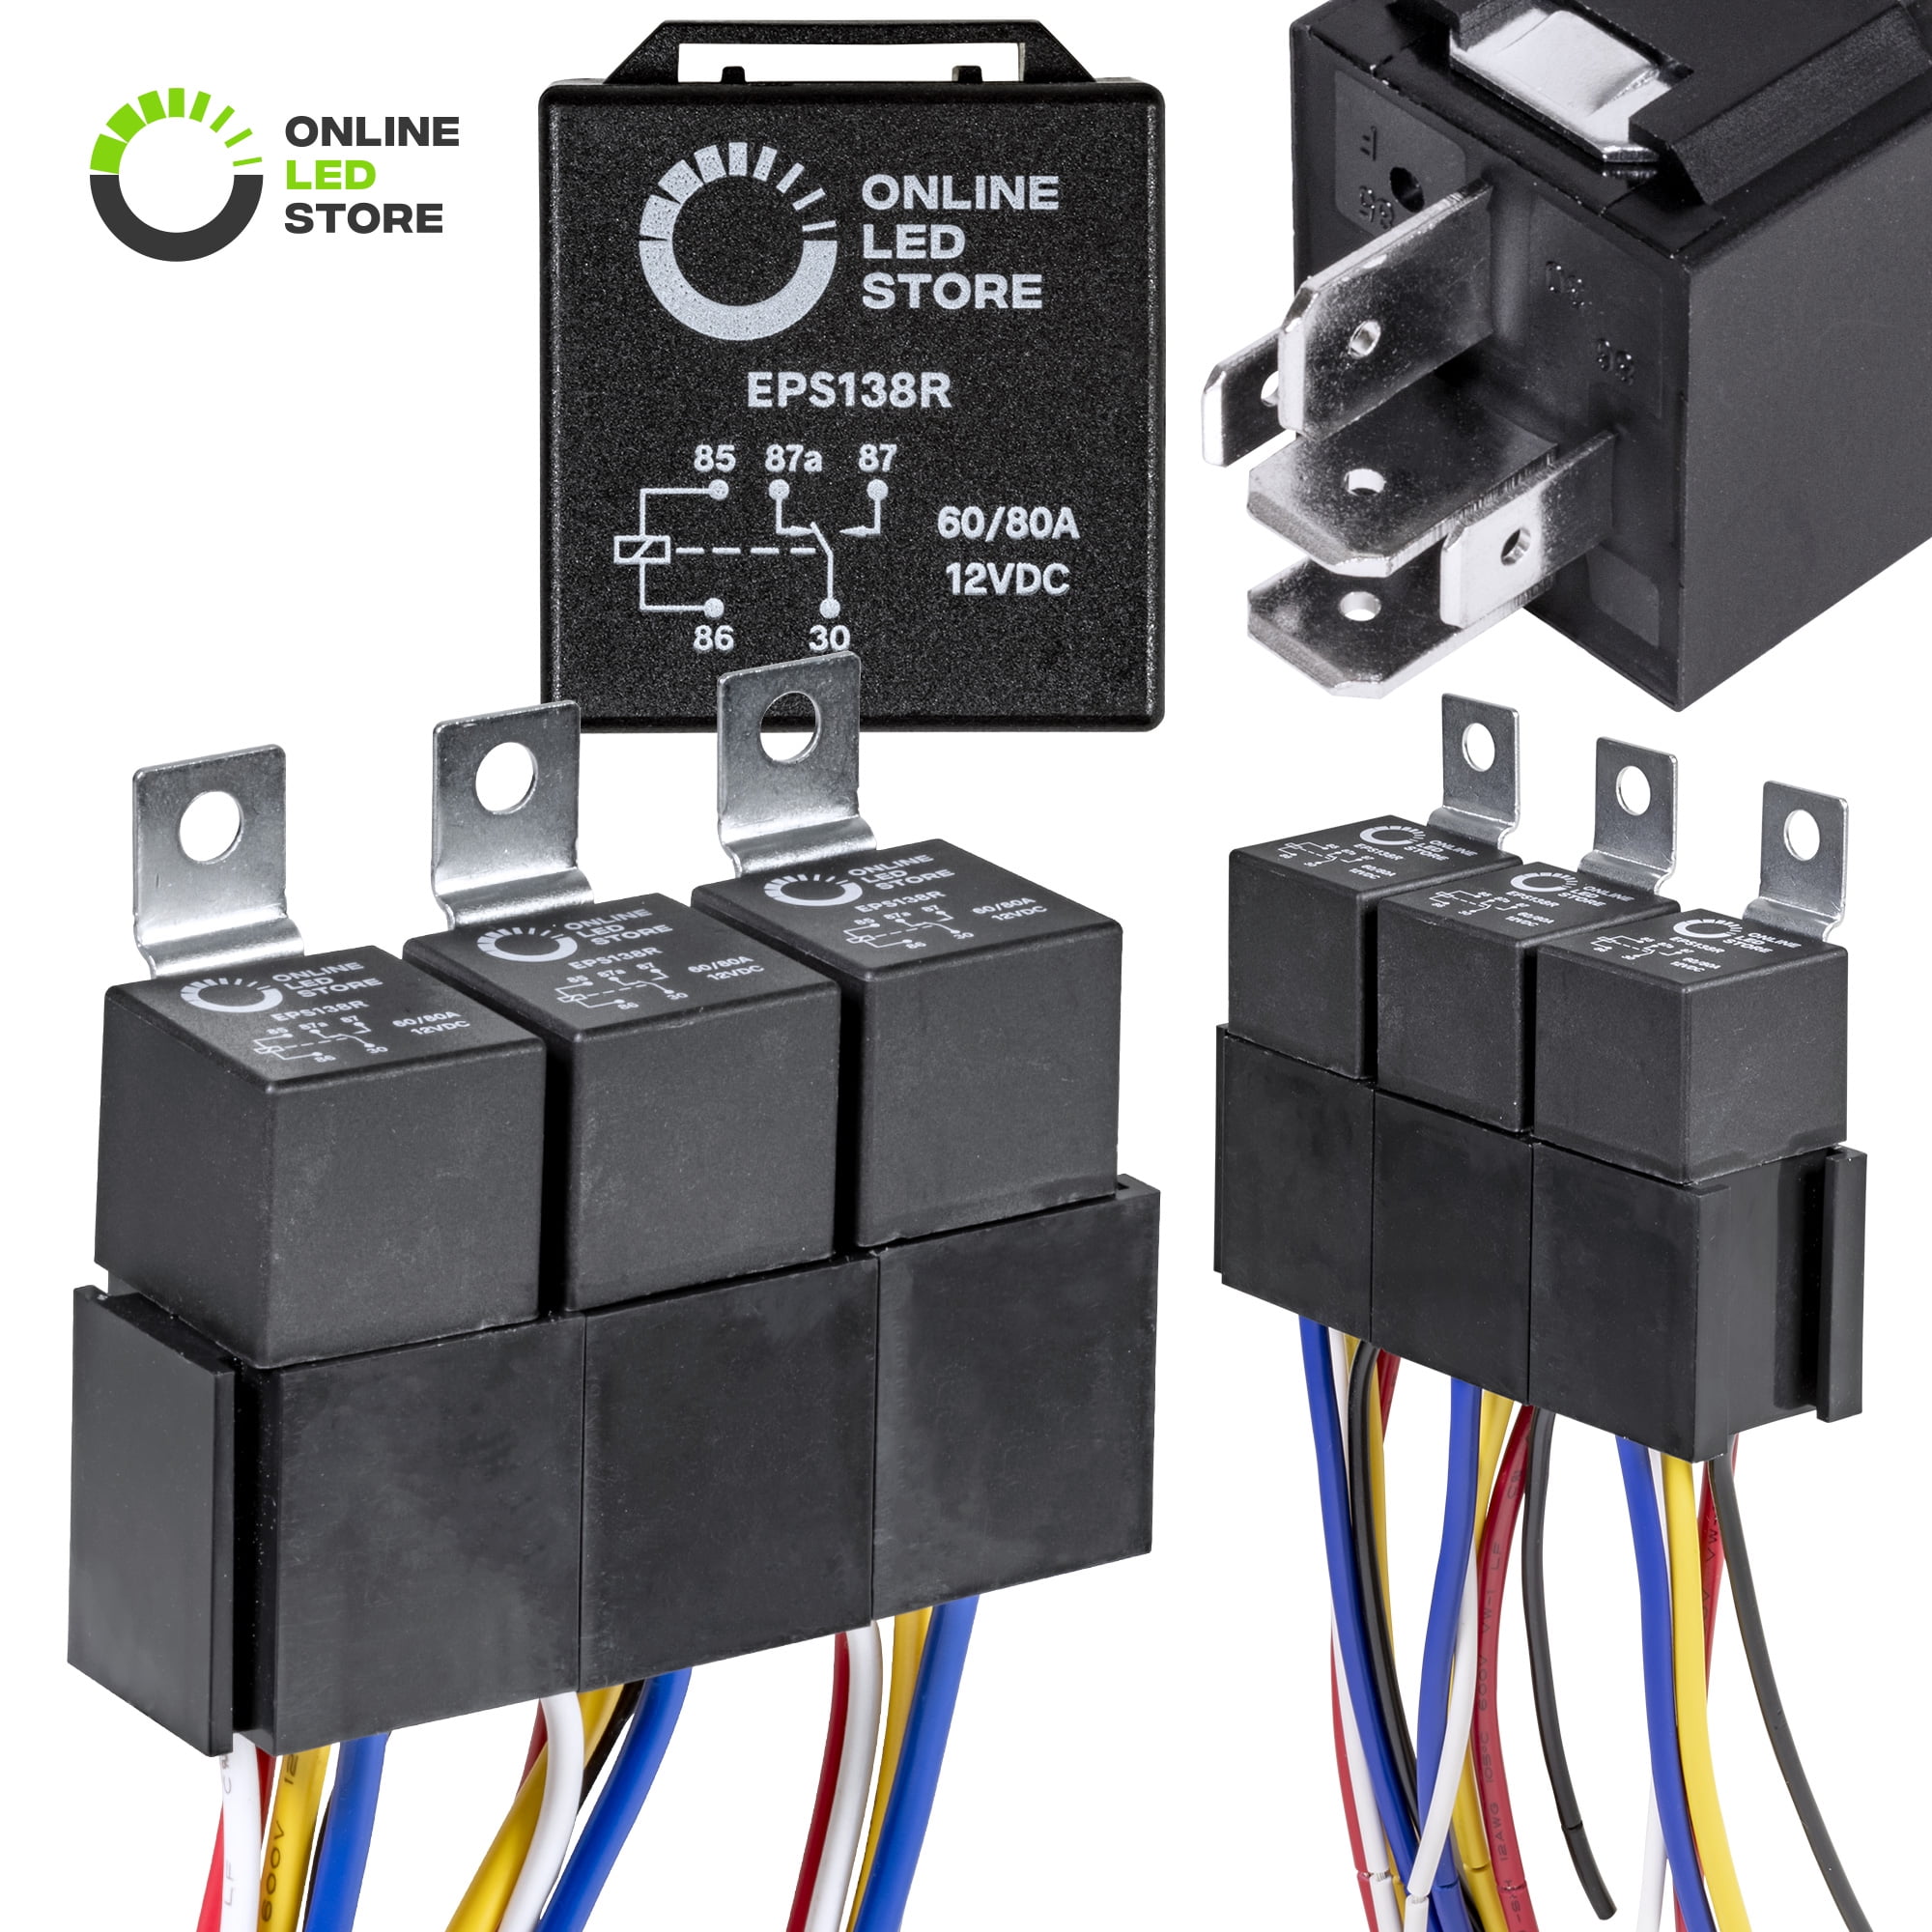 5Pcs 12V 60A AMP Car Vehicle 5 Pin 5 Wire Relay with Harness Waterproof Socket 